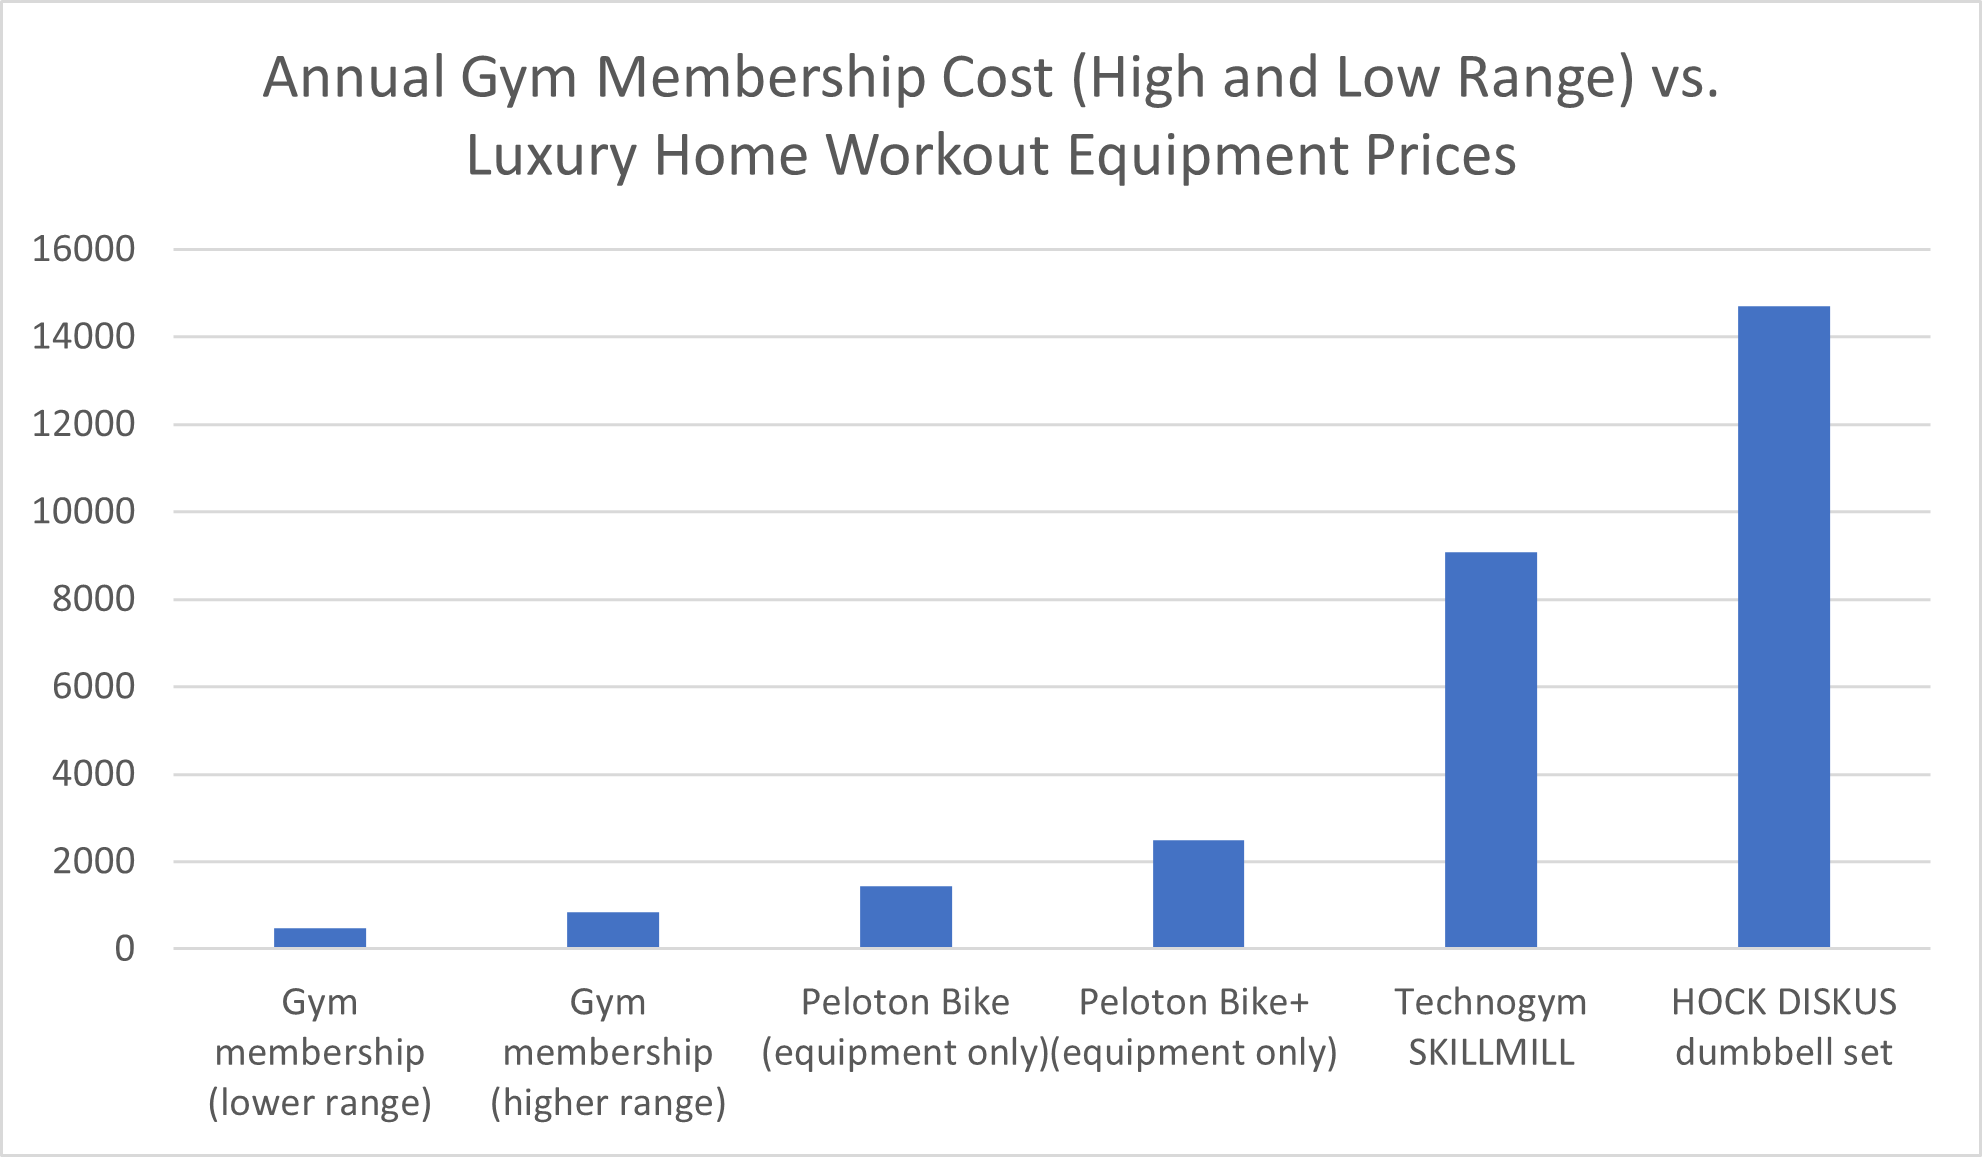 Annual Gym Membership Cost (High and Low Range) vs. Luxury Home Workout Equipment Prices